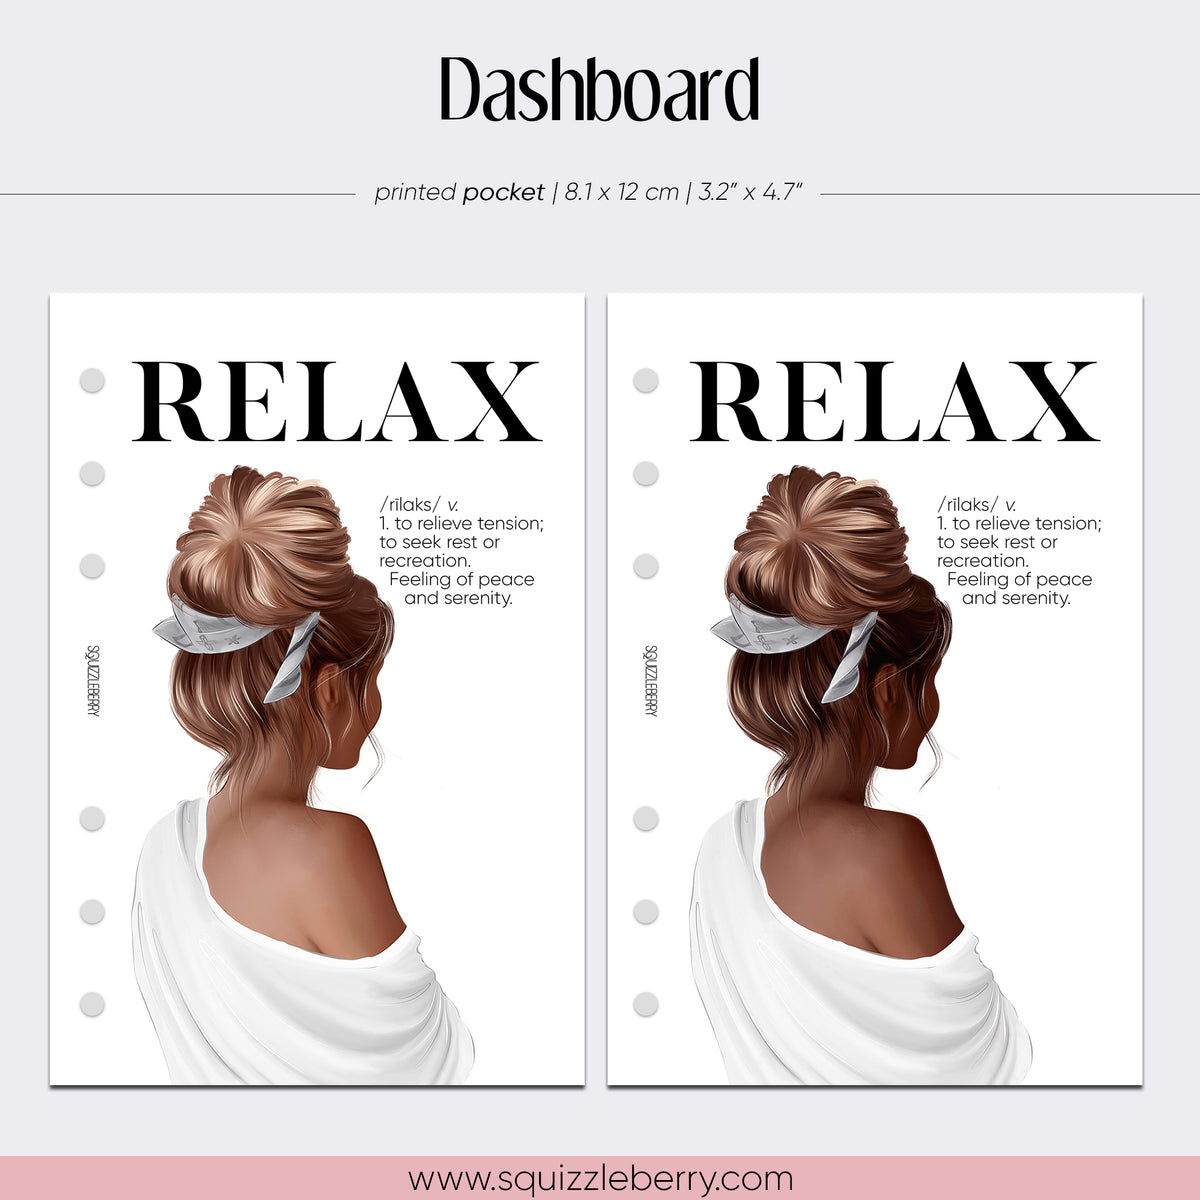 relax self care me time planner dashboard for pocket planner